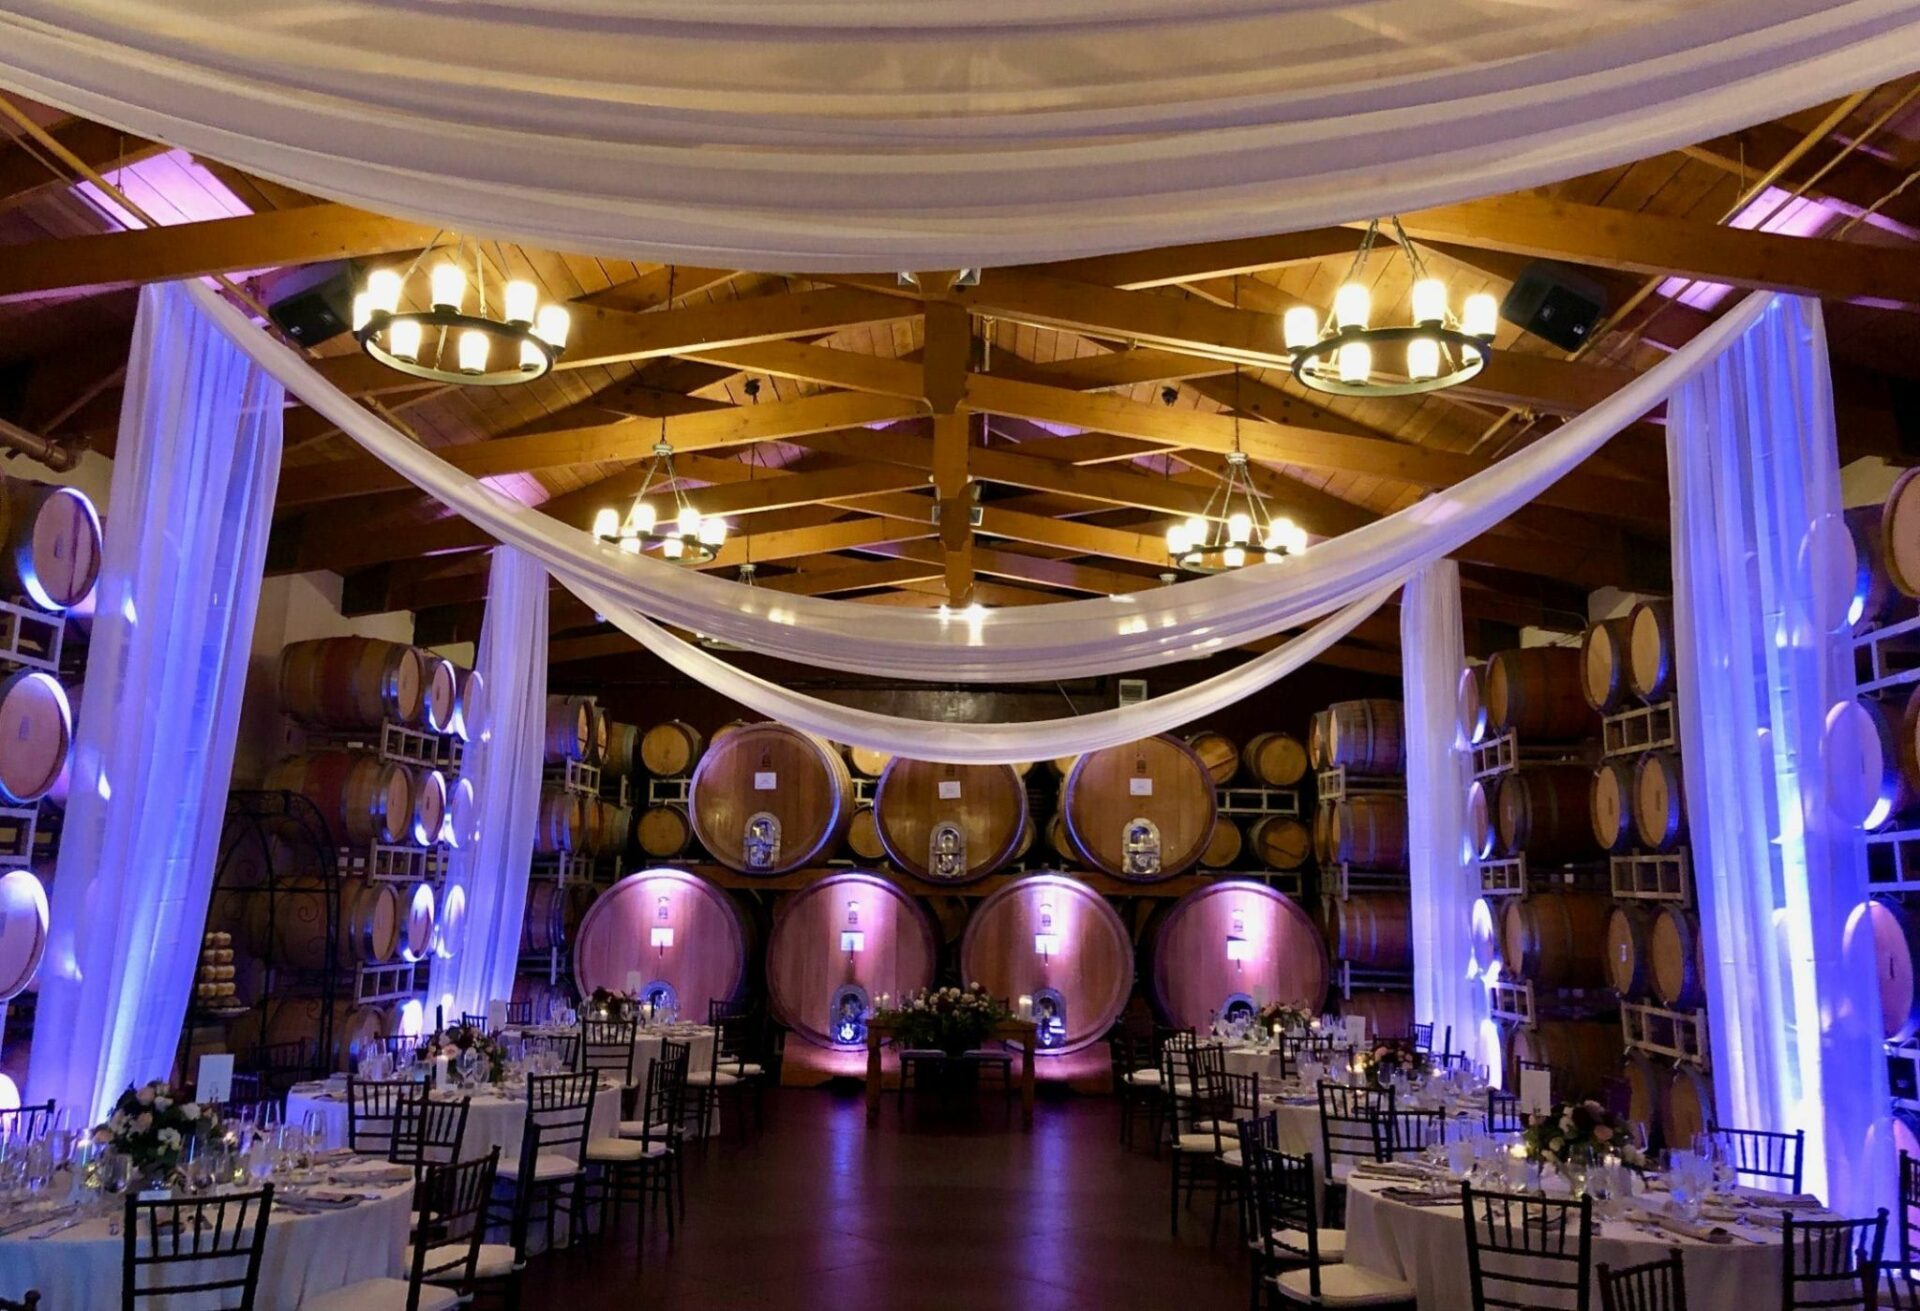 A wedding reception in a wine cellar with blue lighting.